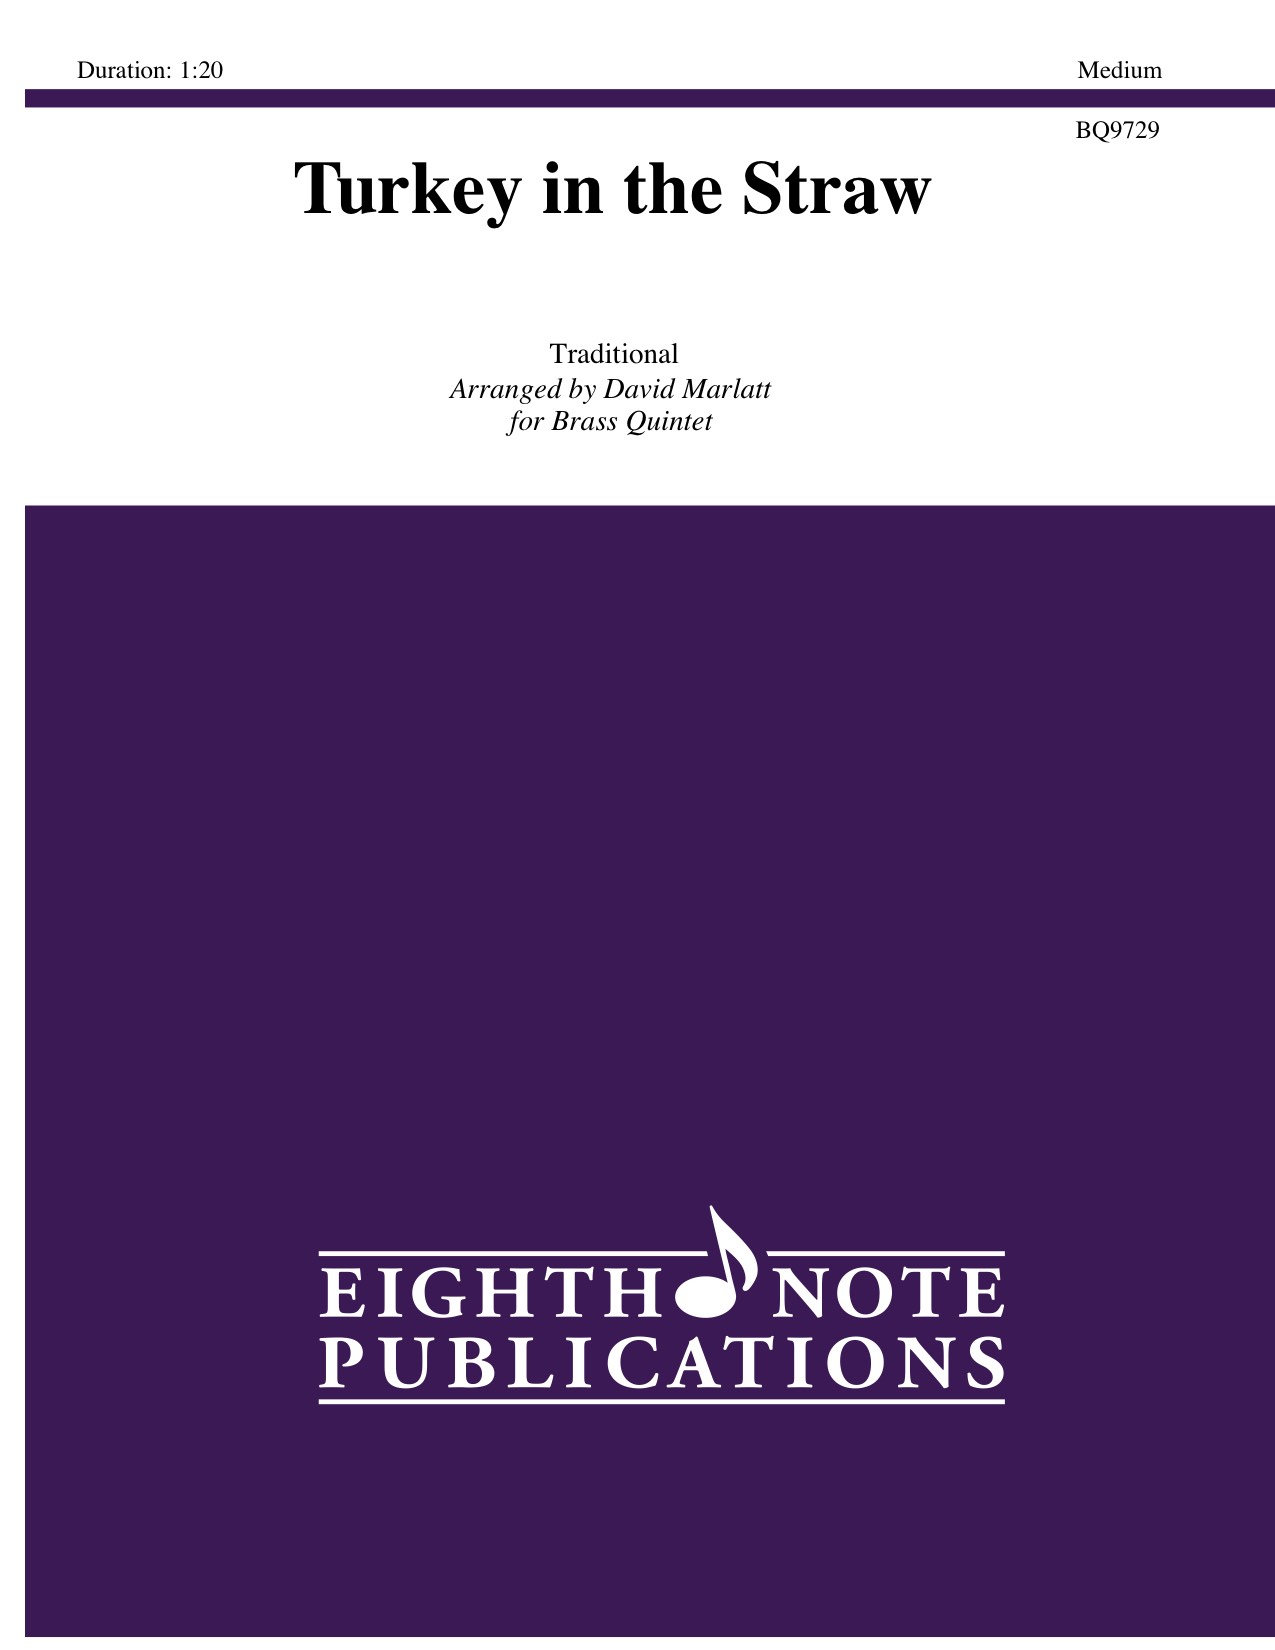 Turkey in the Straw -  Traditional